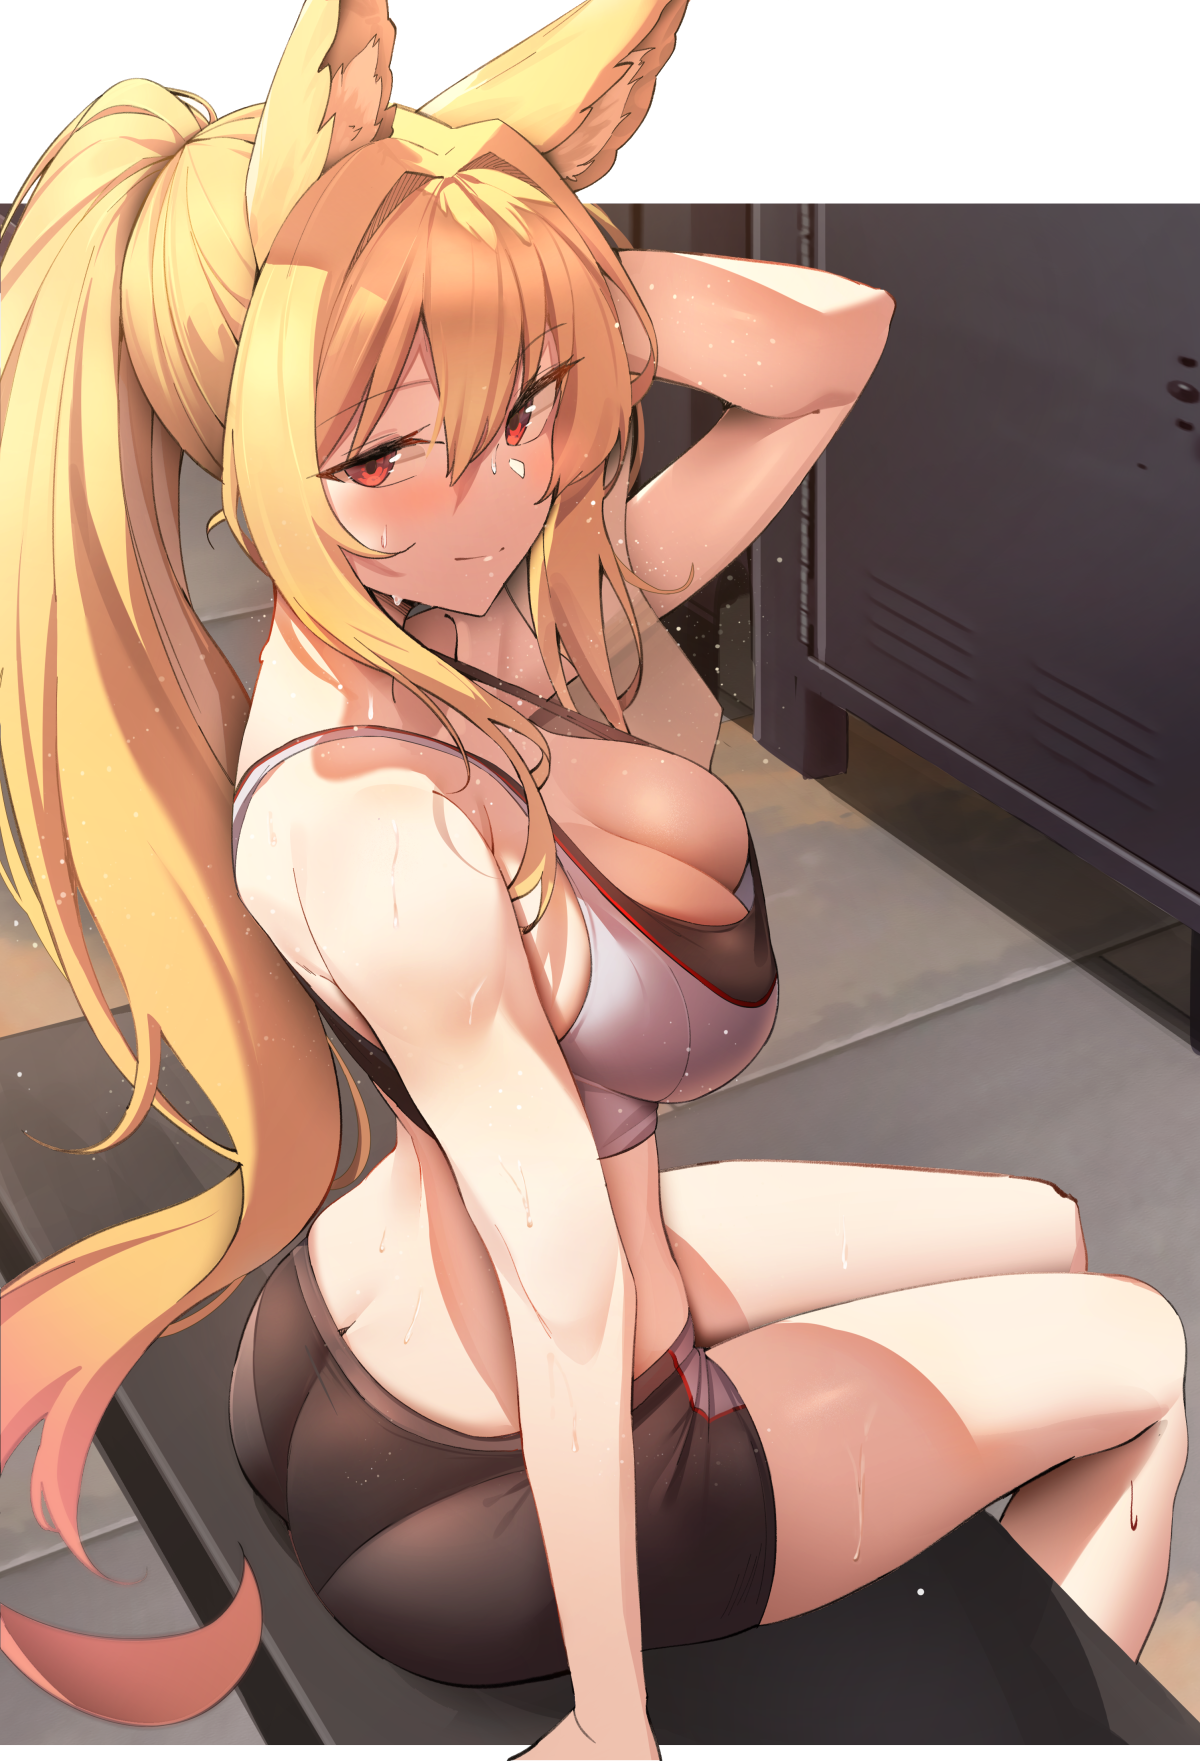 Anime 1200x1761 anime anime girls digital art artwork 2D portrait display cleavage animal ears blonde ponytail red eyes gym clothes sweat K pring Dungeon and Fighter sitting